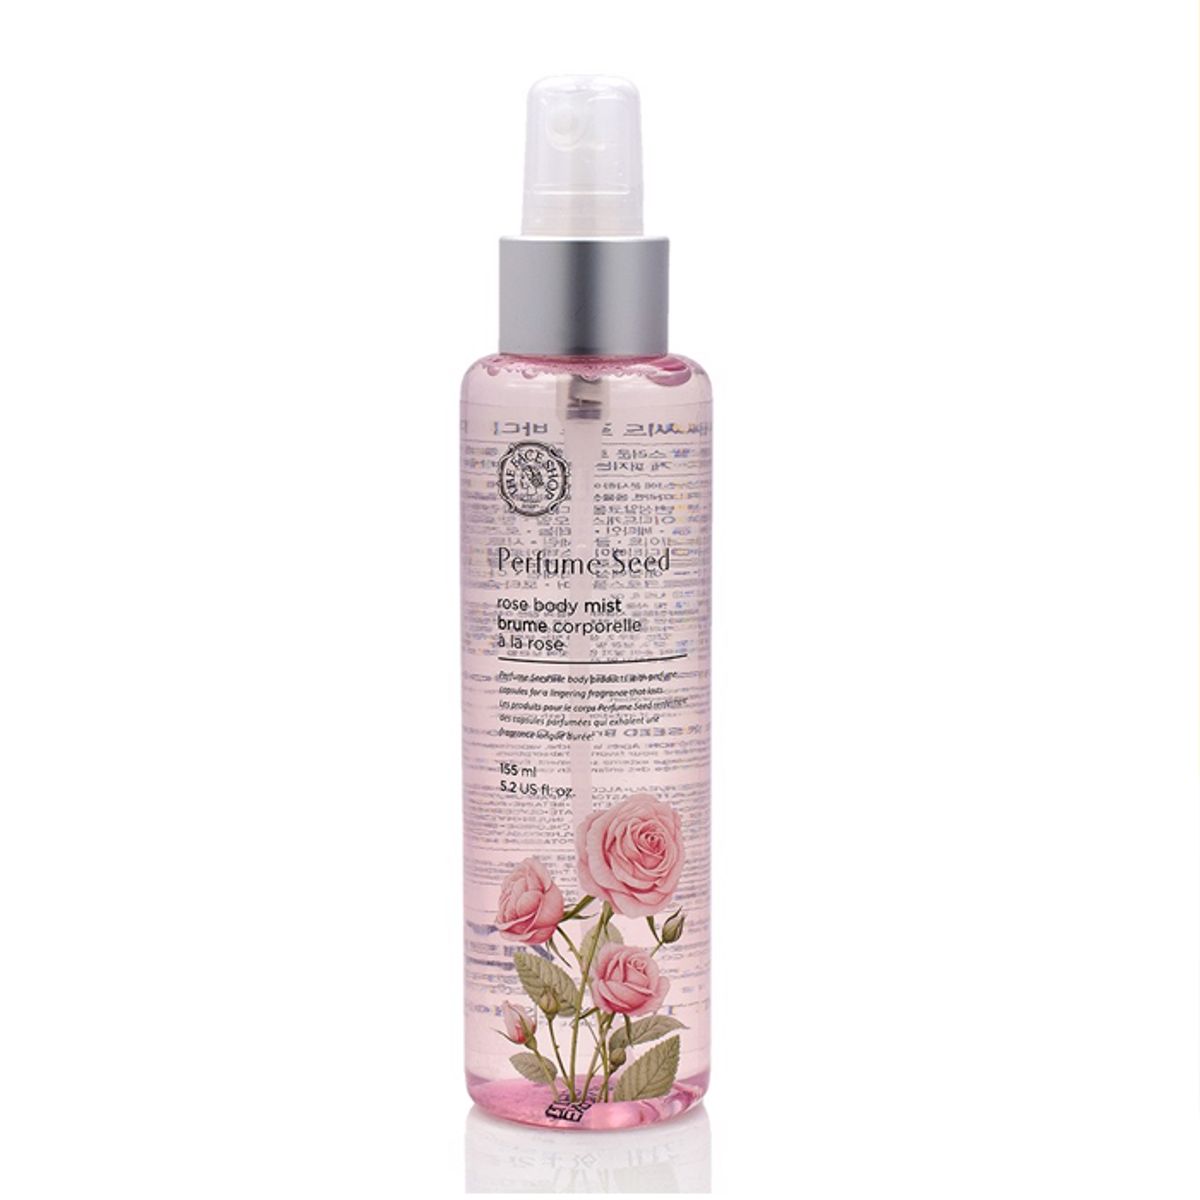 xit-duong-the-huong-nuoc-hoa-perfume-seed-rose-body-mist-155ml-1